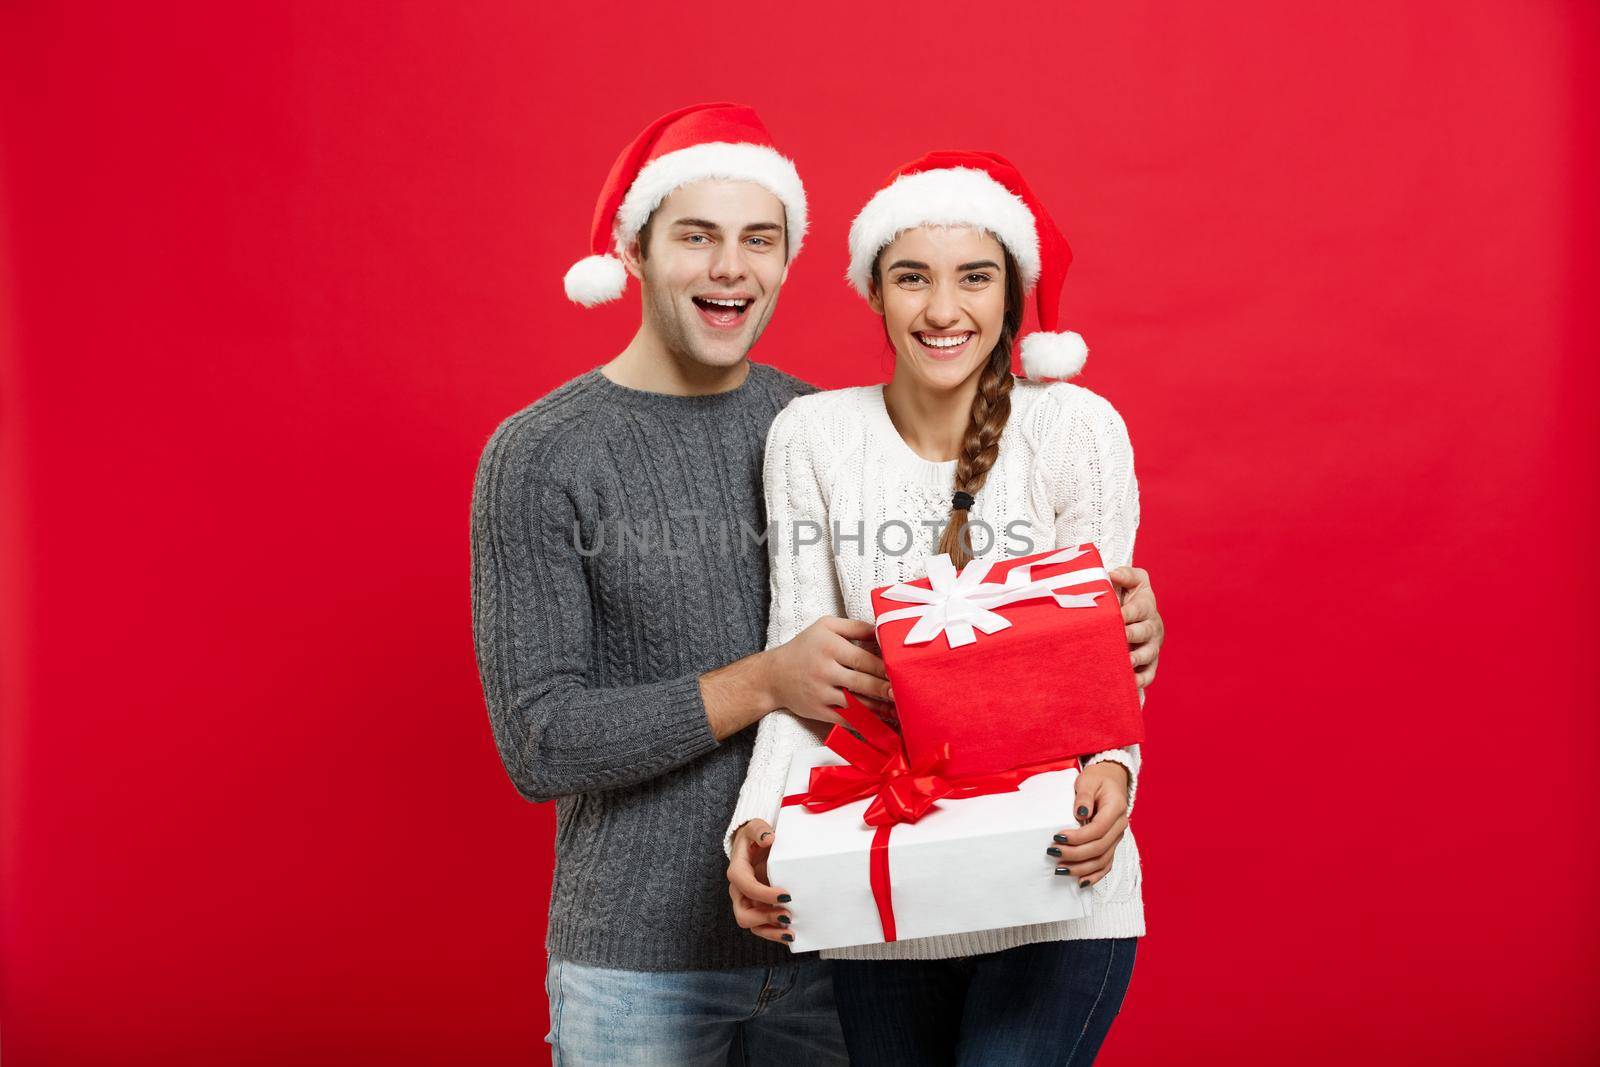 Christmas Concept - handsome young boyfriend in Christmas sweater surprise his girlfriend with gifts.